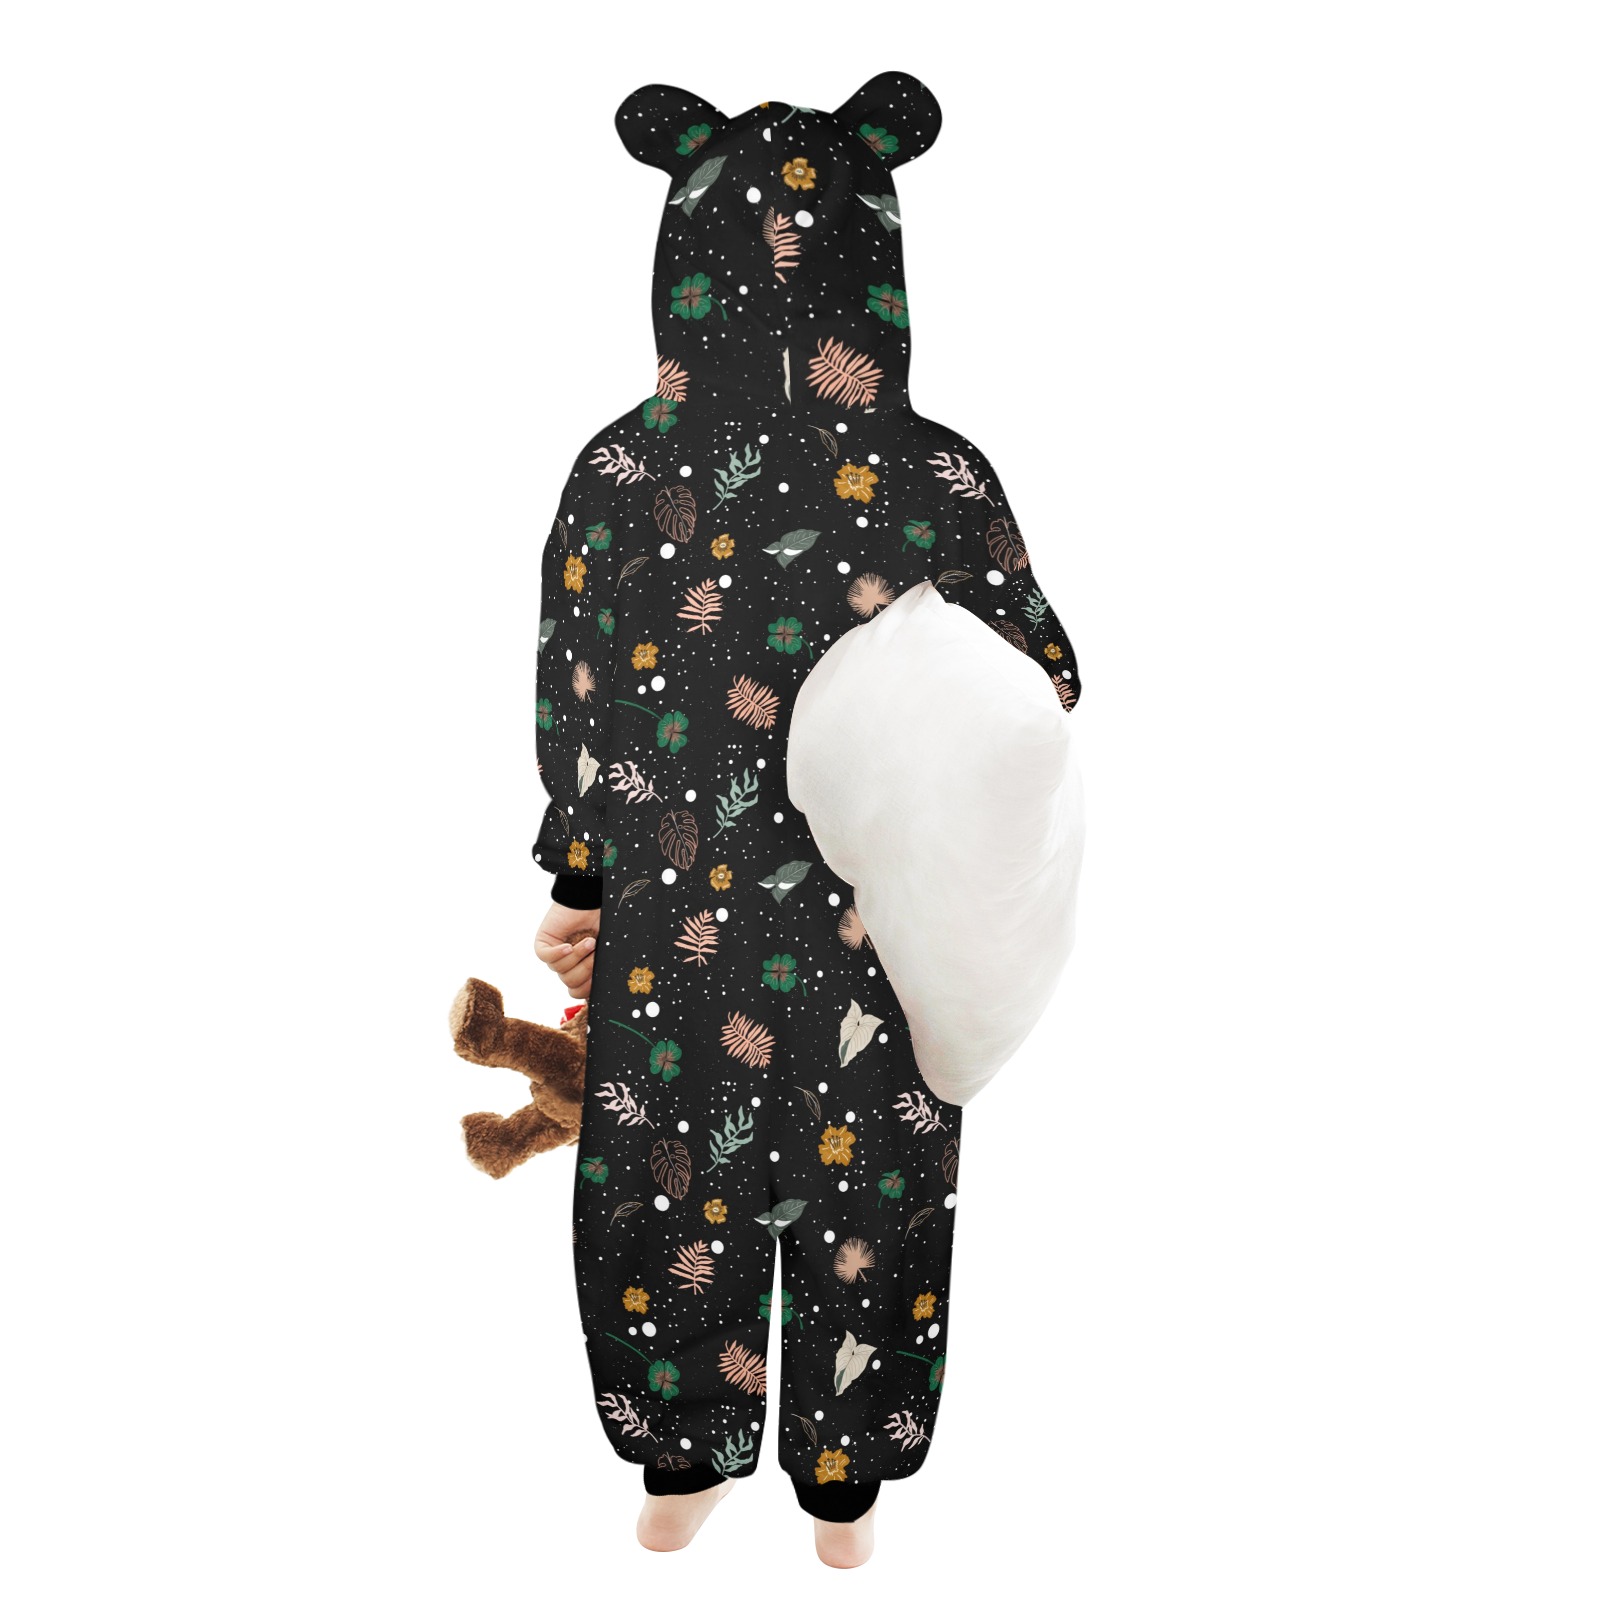 Lucky nature in space I One-Piece Zip up Hooded Pajamas for Little Kids